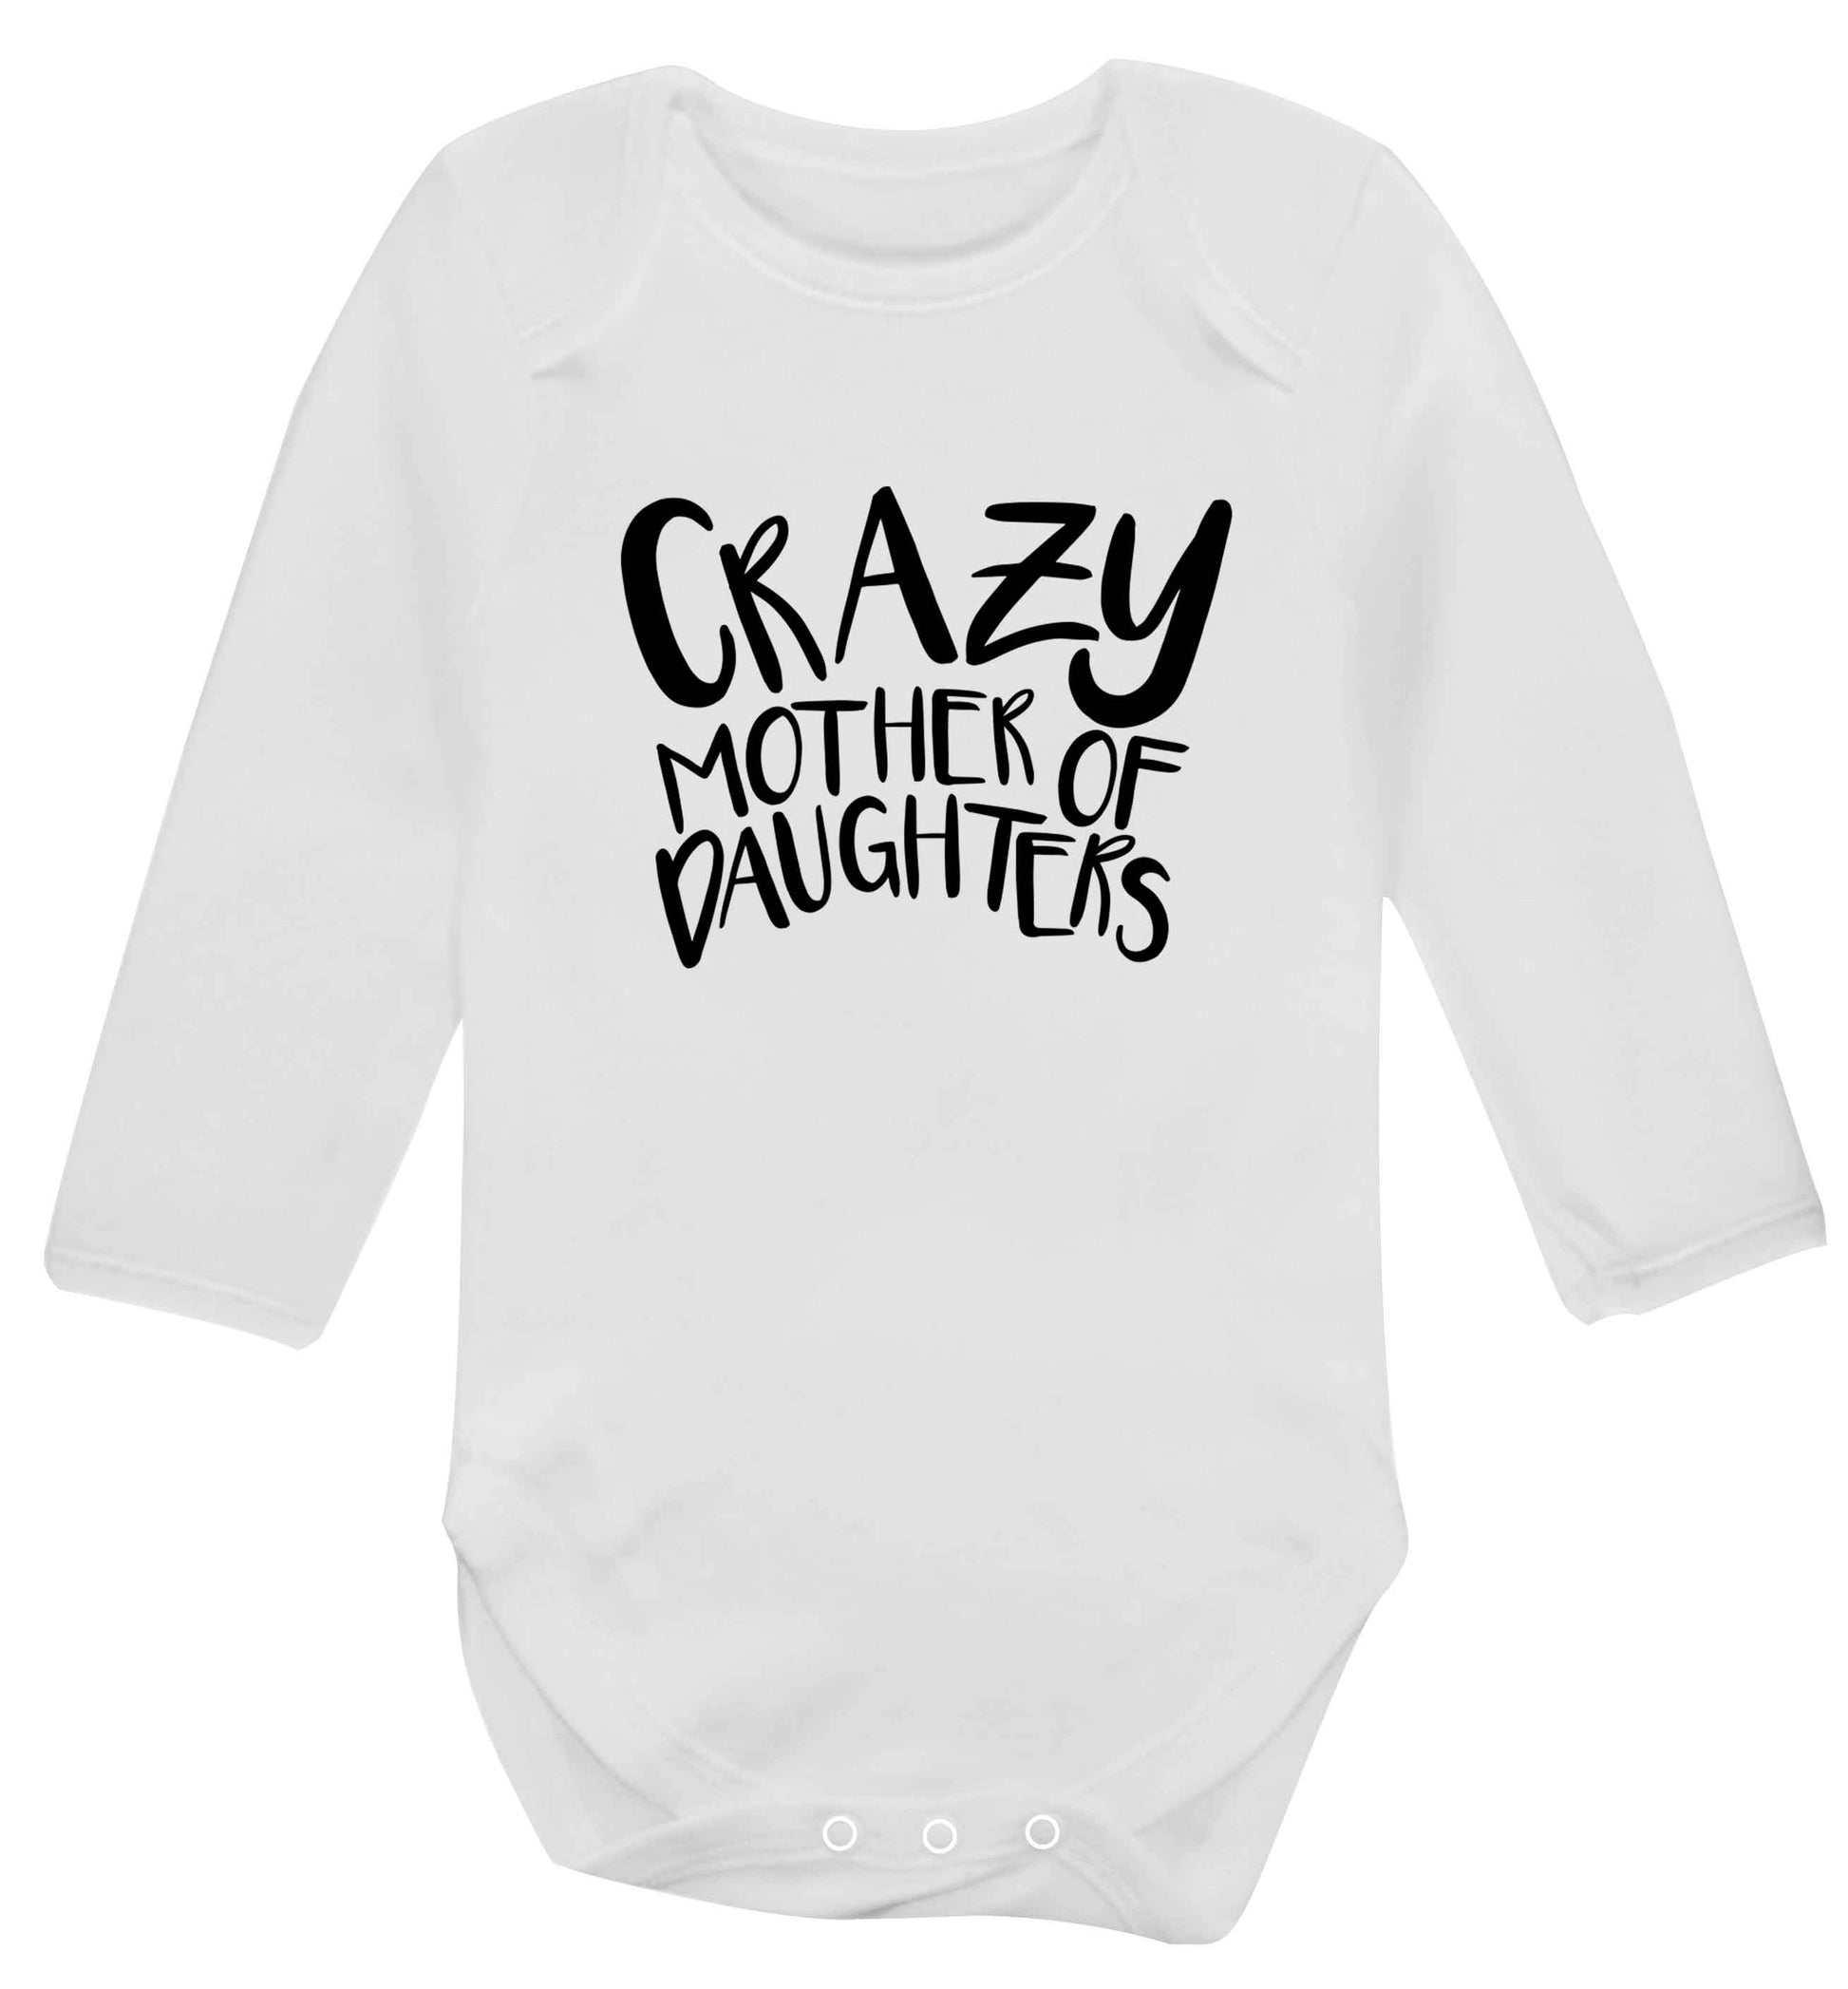 Crazy mother of daughters baby vest long sleeved white 6-12 months